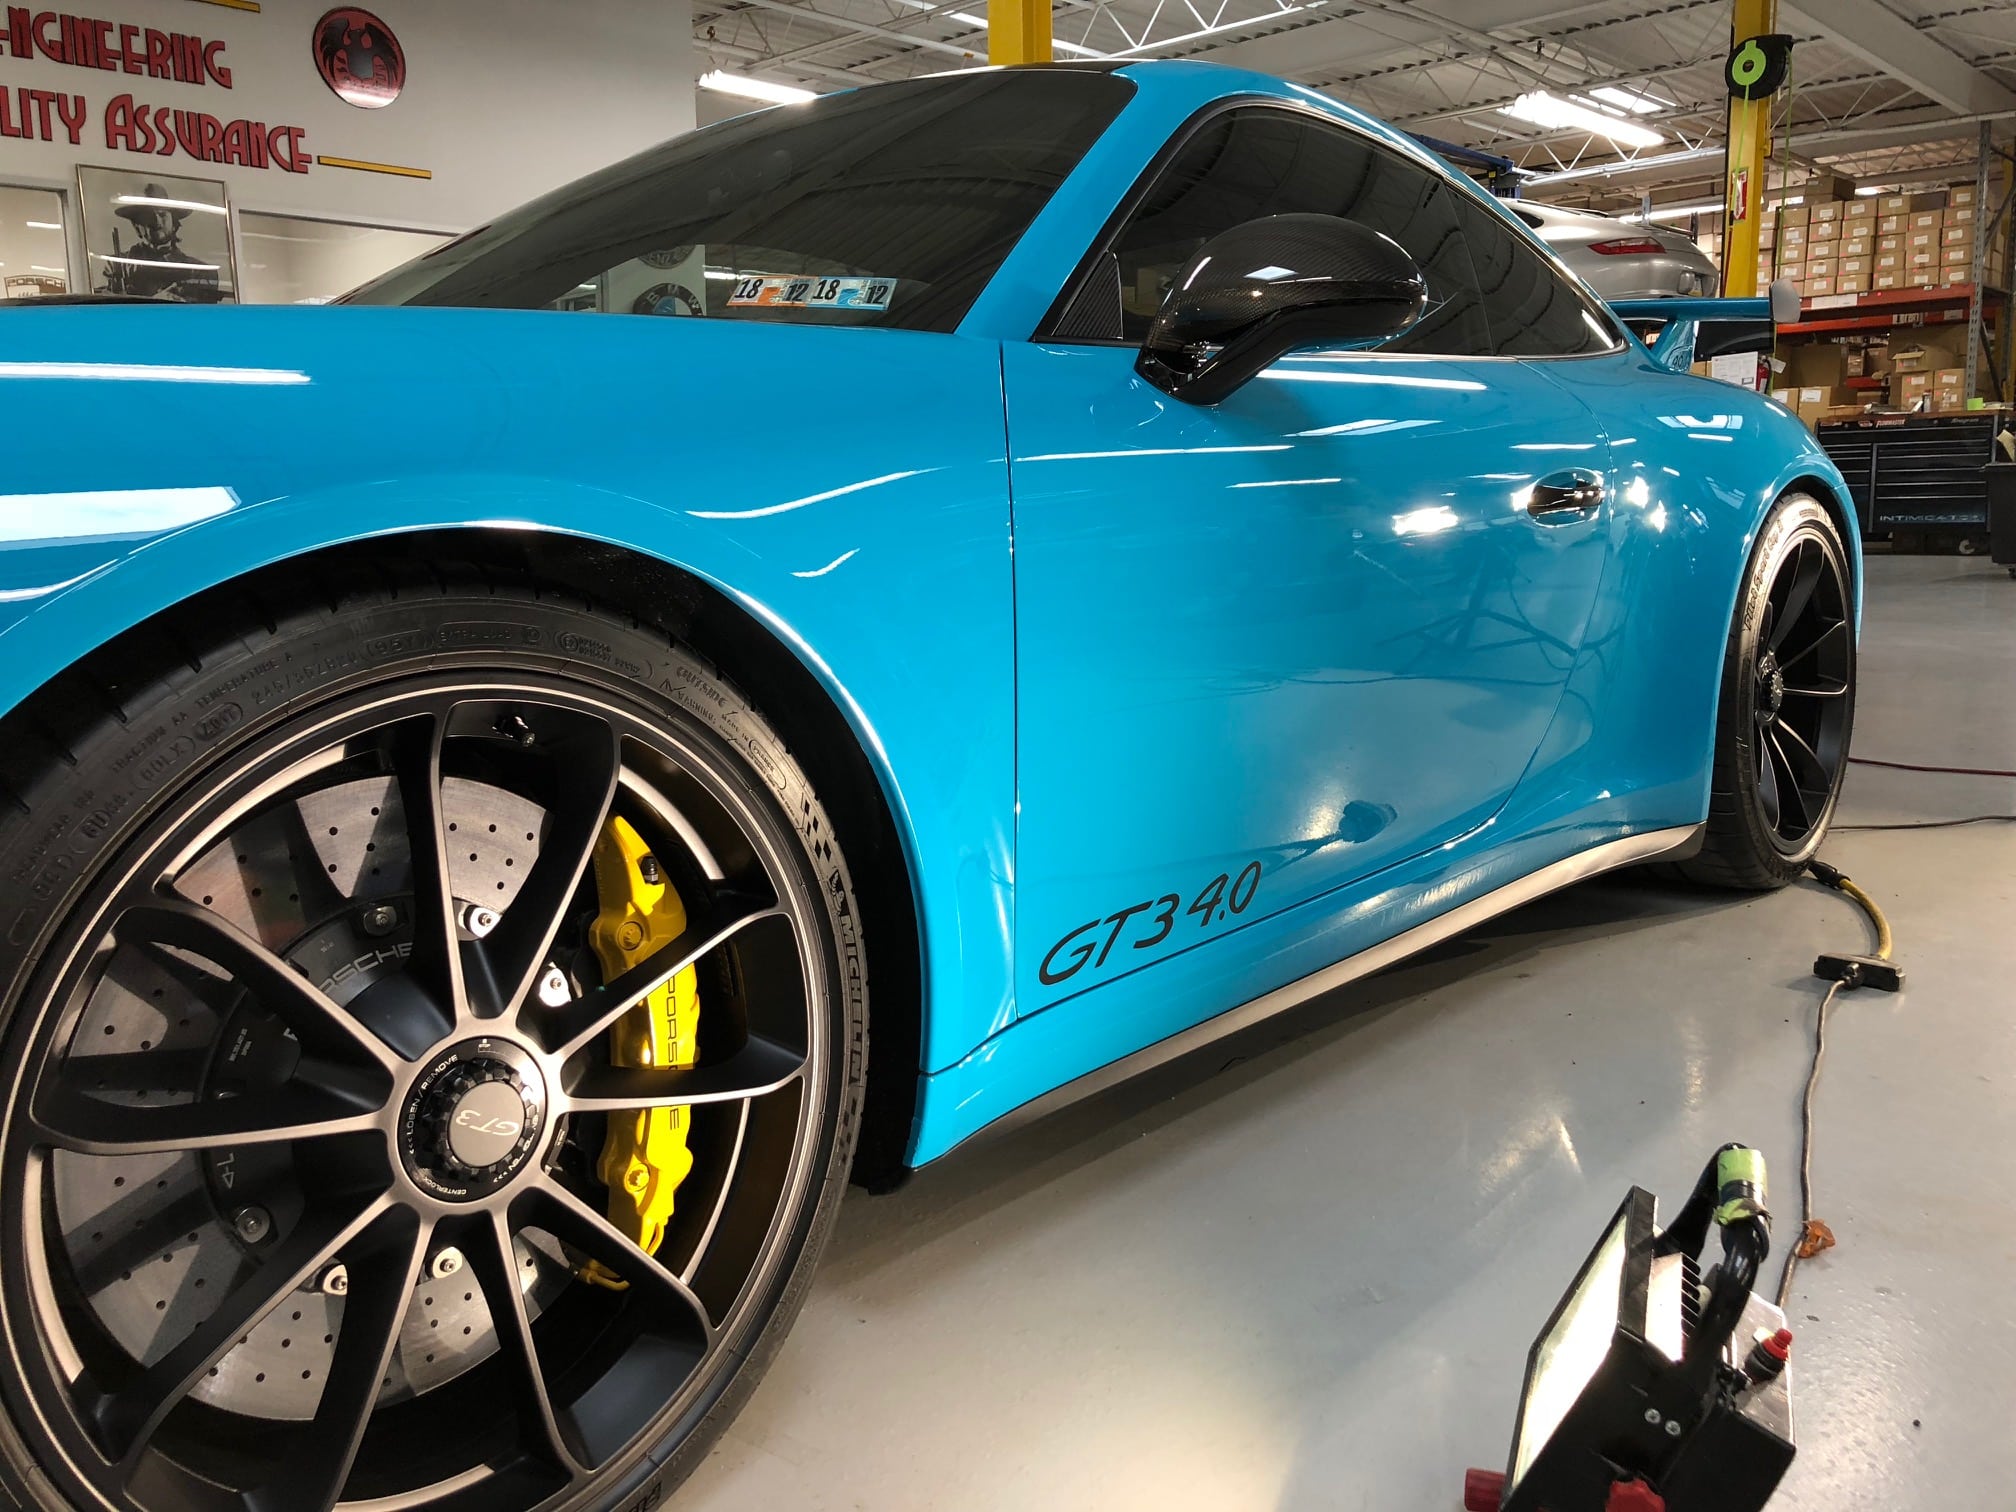 Ceramic Coatings for Cars: Everything You Need to Know